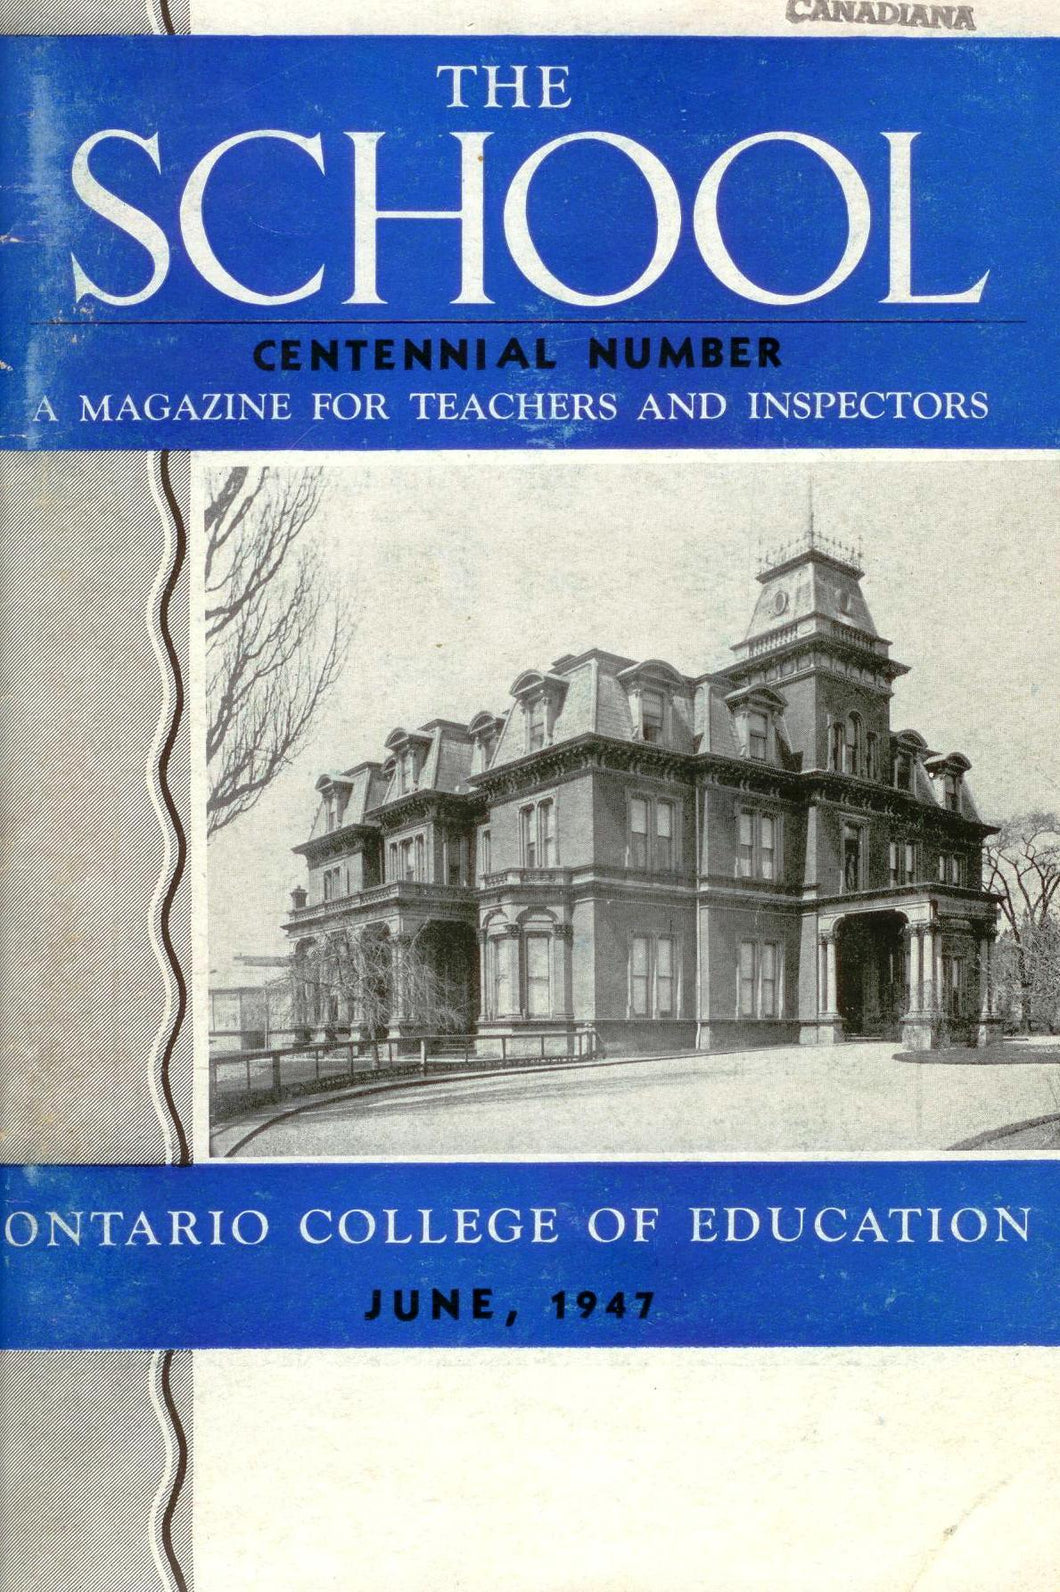 The School: A Magazine For Teachers and Inspectors